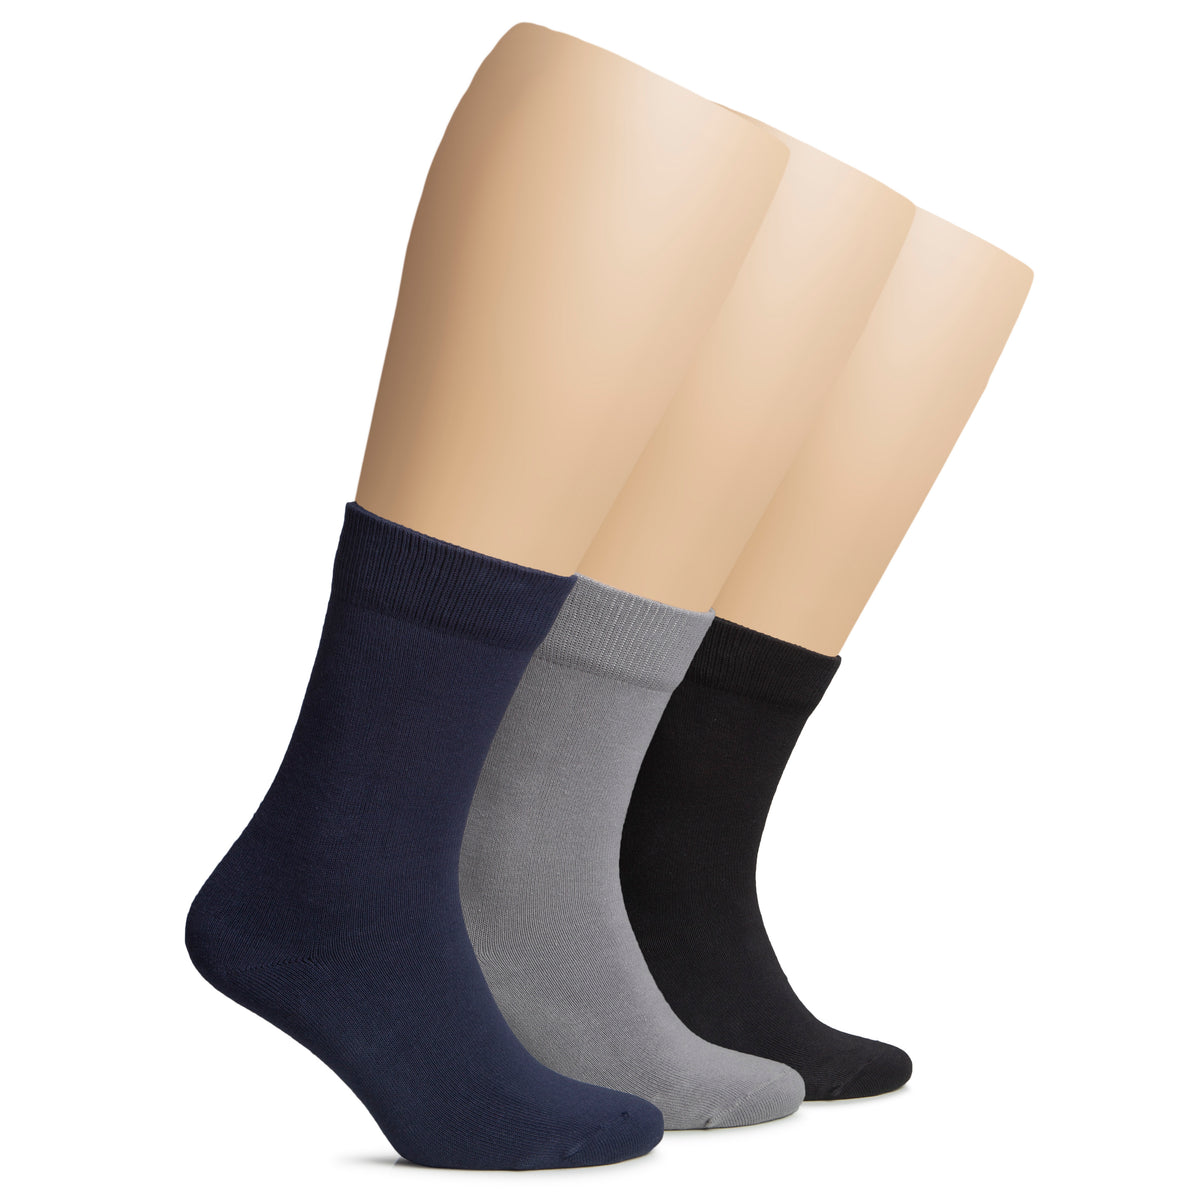 The picture shows women's socks in black, grey, and blue. These are Winter Cotton Crew Socks designed for women.